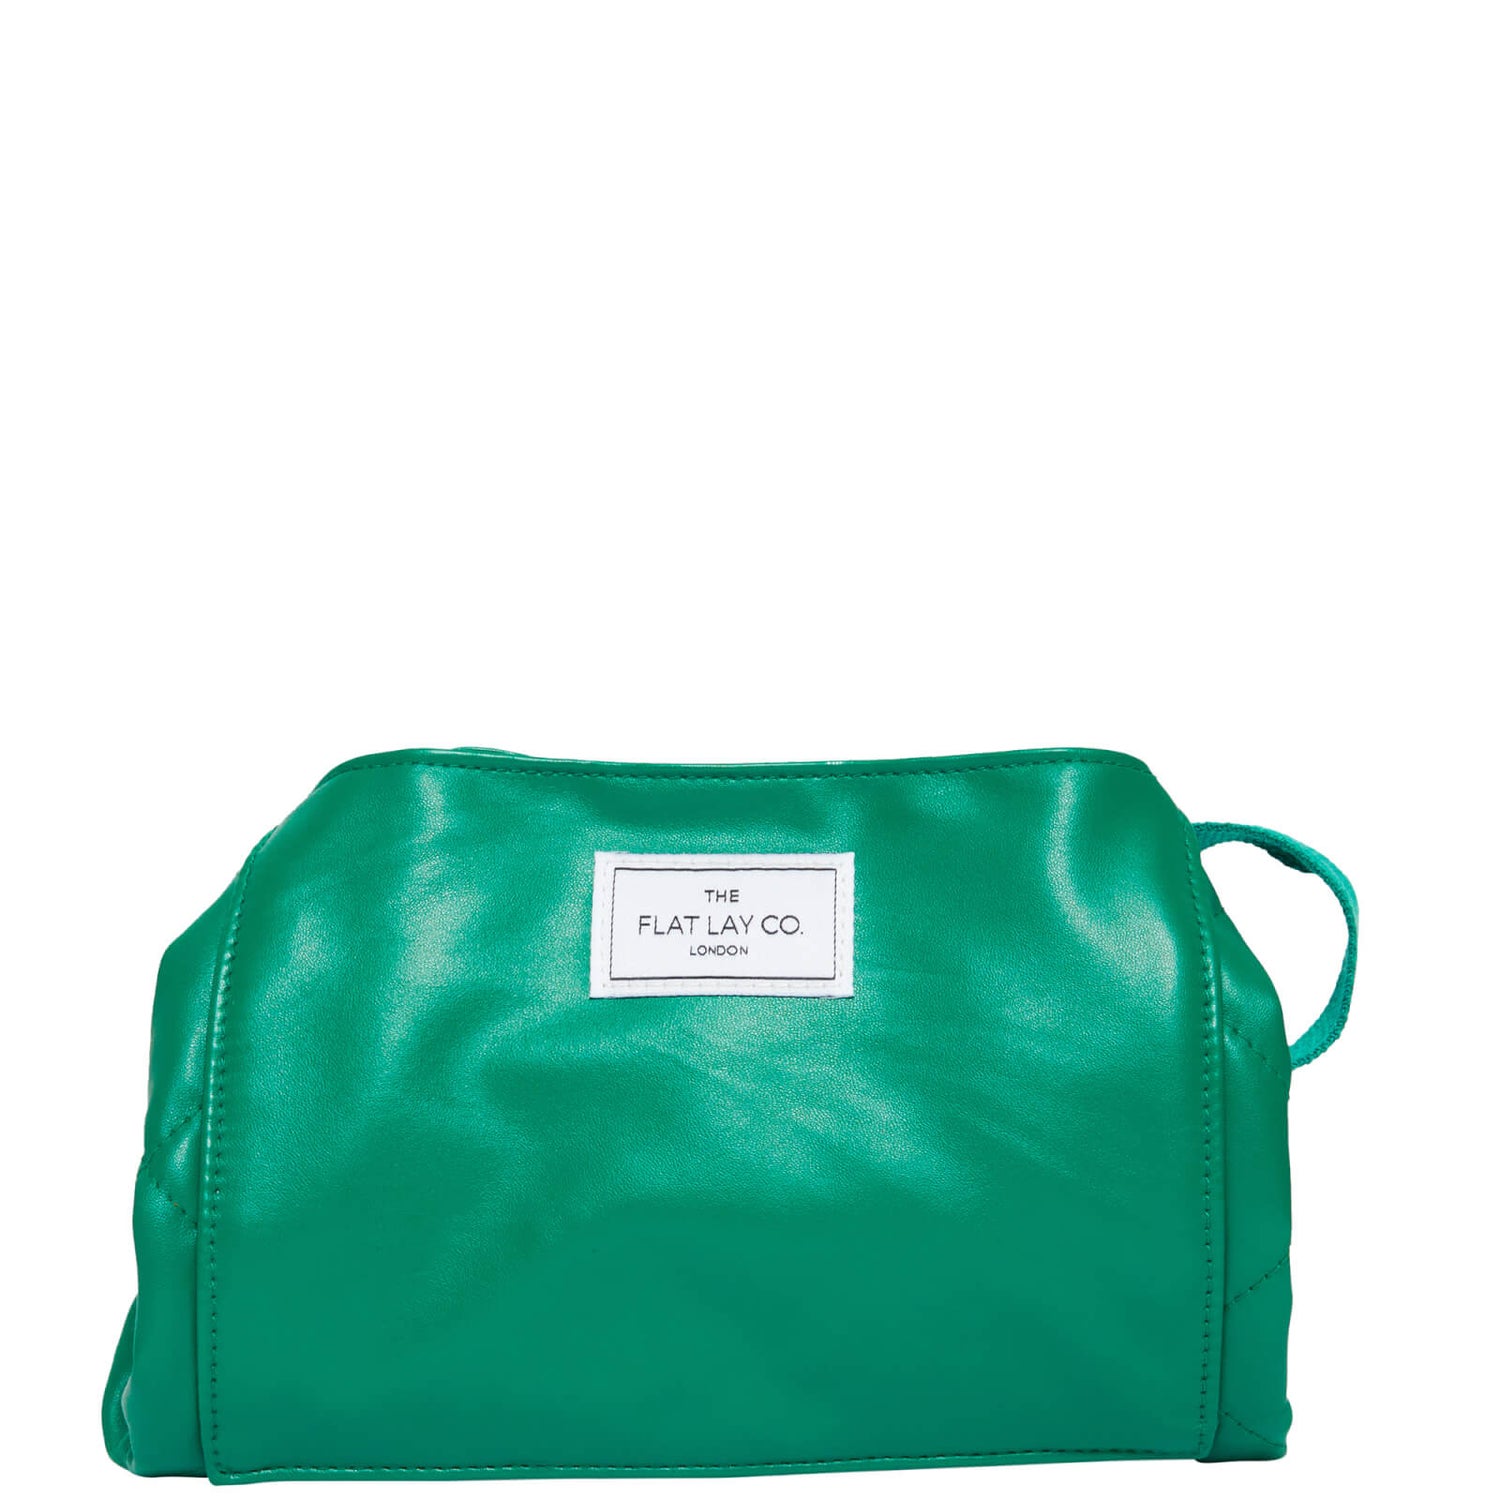 The Flat Lay Co. Open Flat Makeup Bag - Bottle Green Leather Monochrome